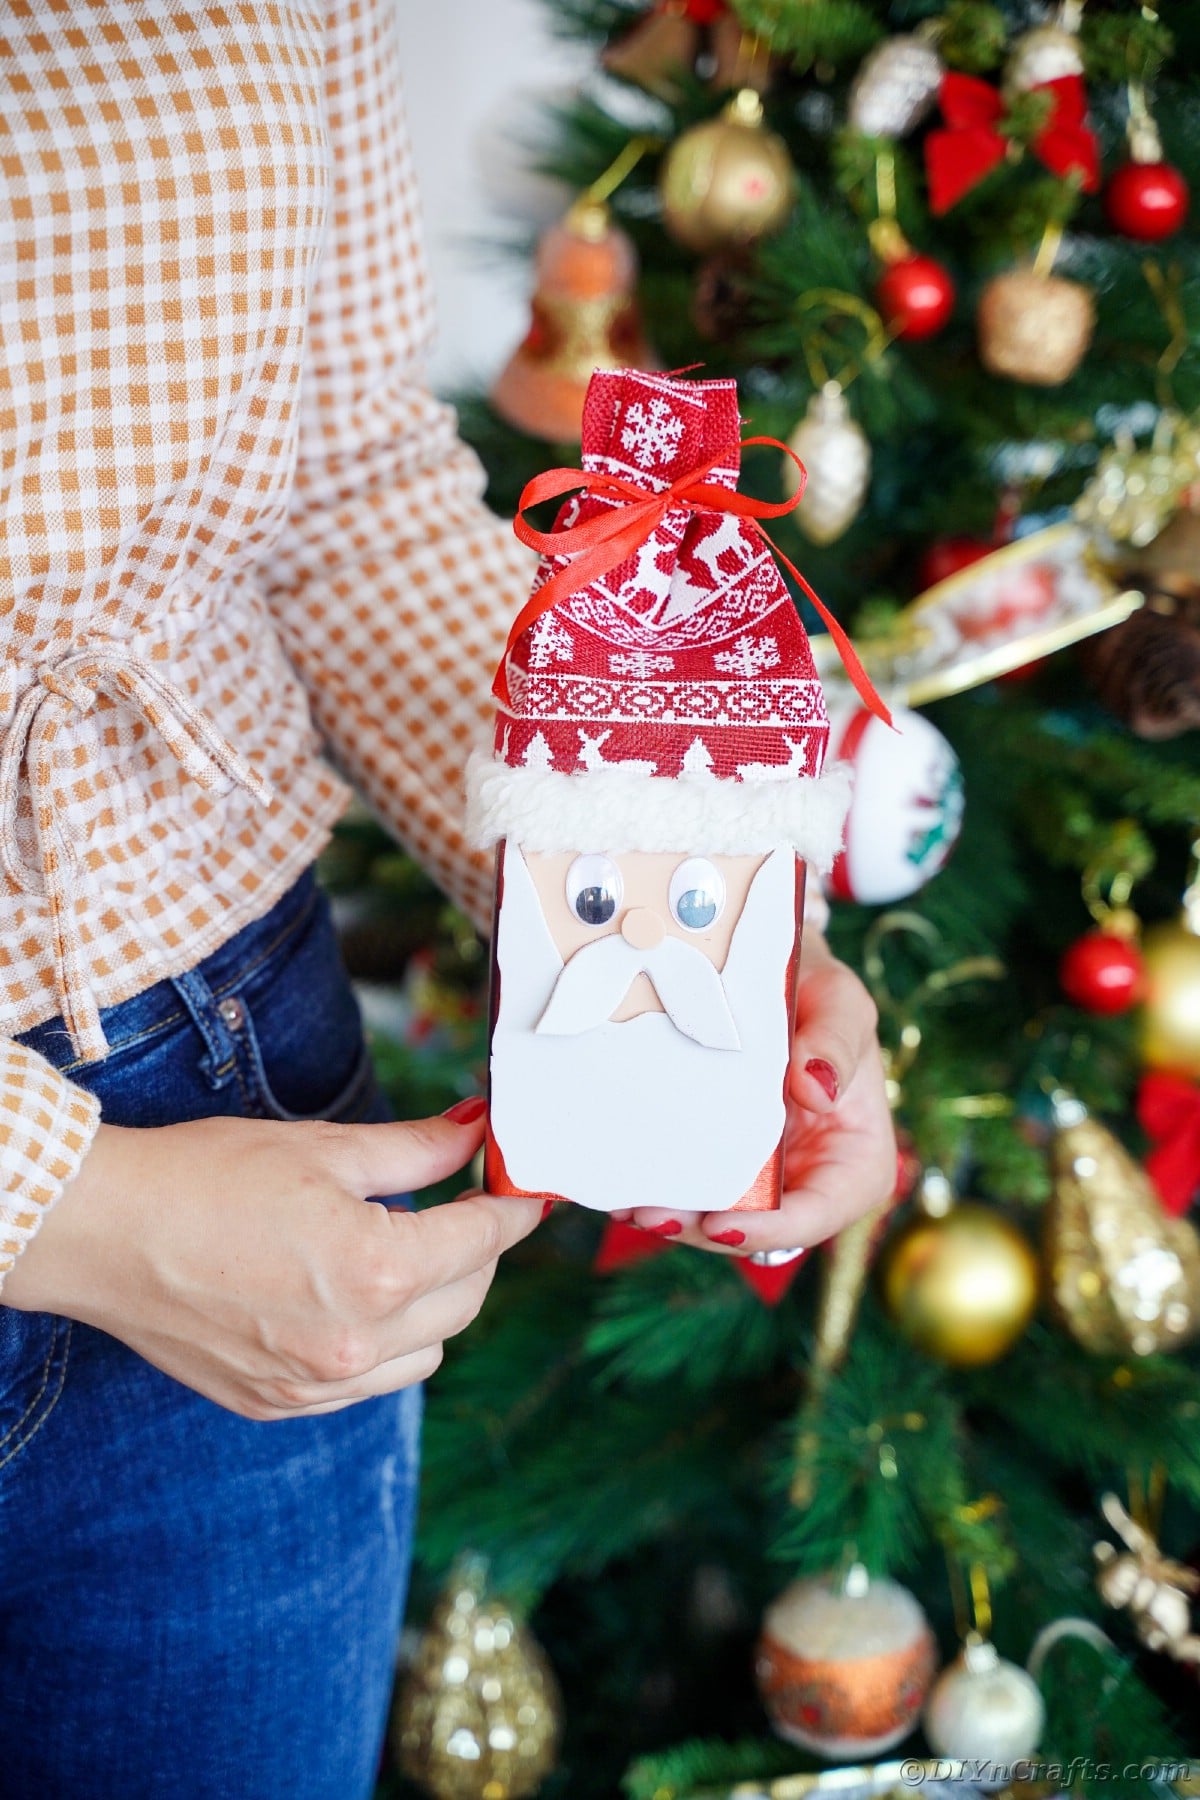 woman in jeans and checked shirt holding a little santa claus in front of Christmas tree